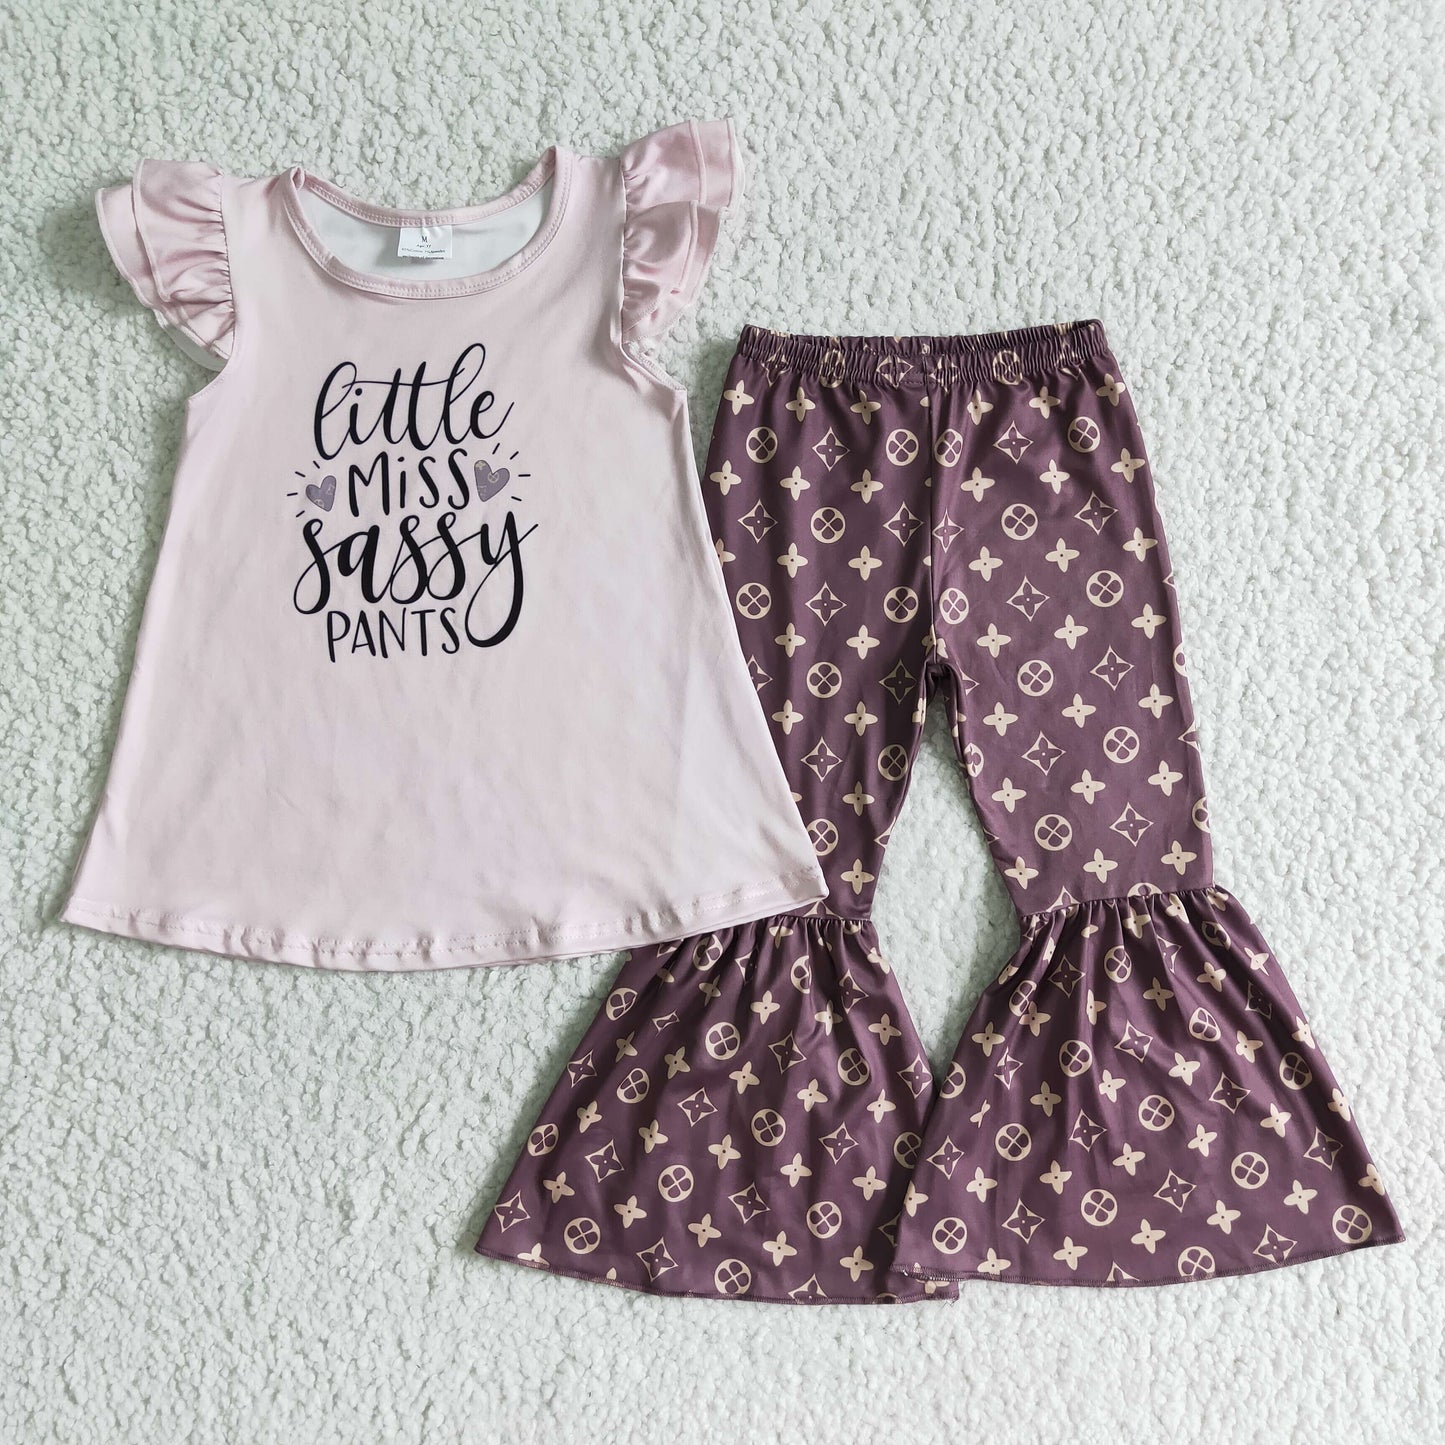 Little miss sassy pants girls outfits